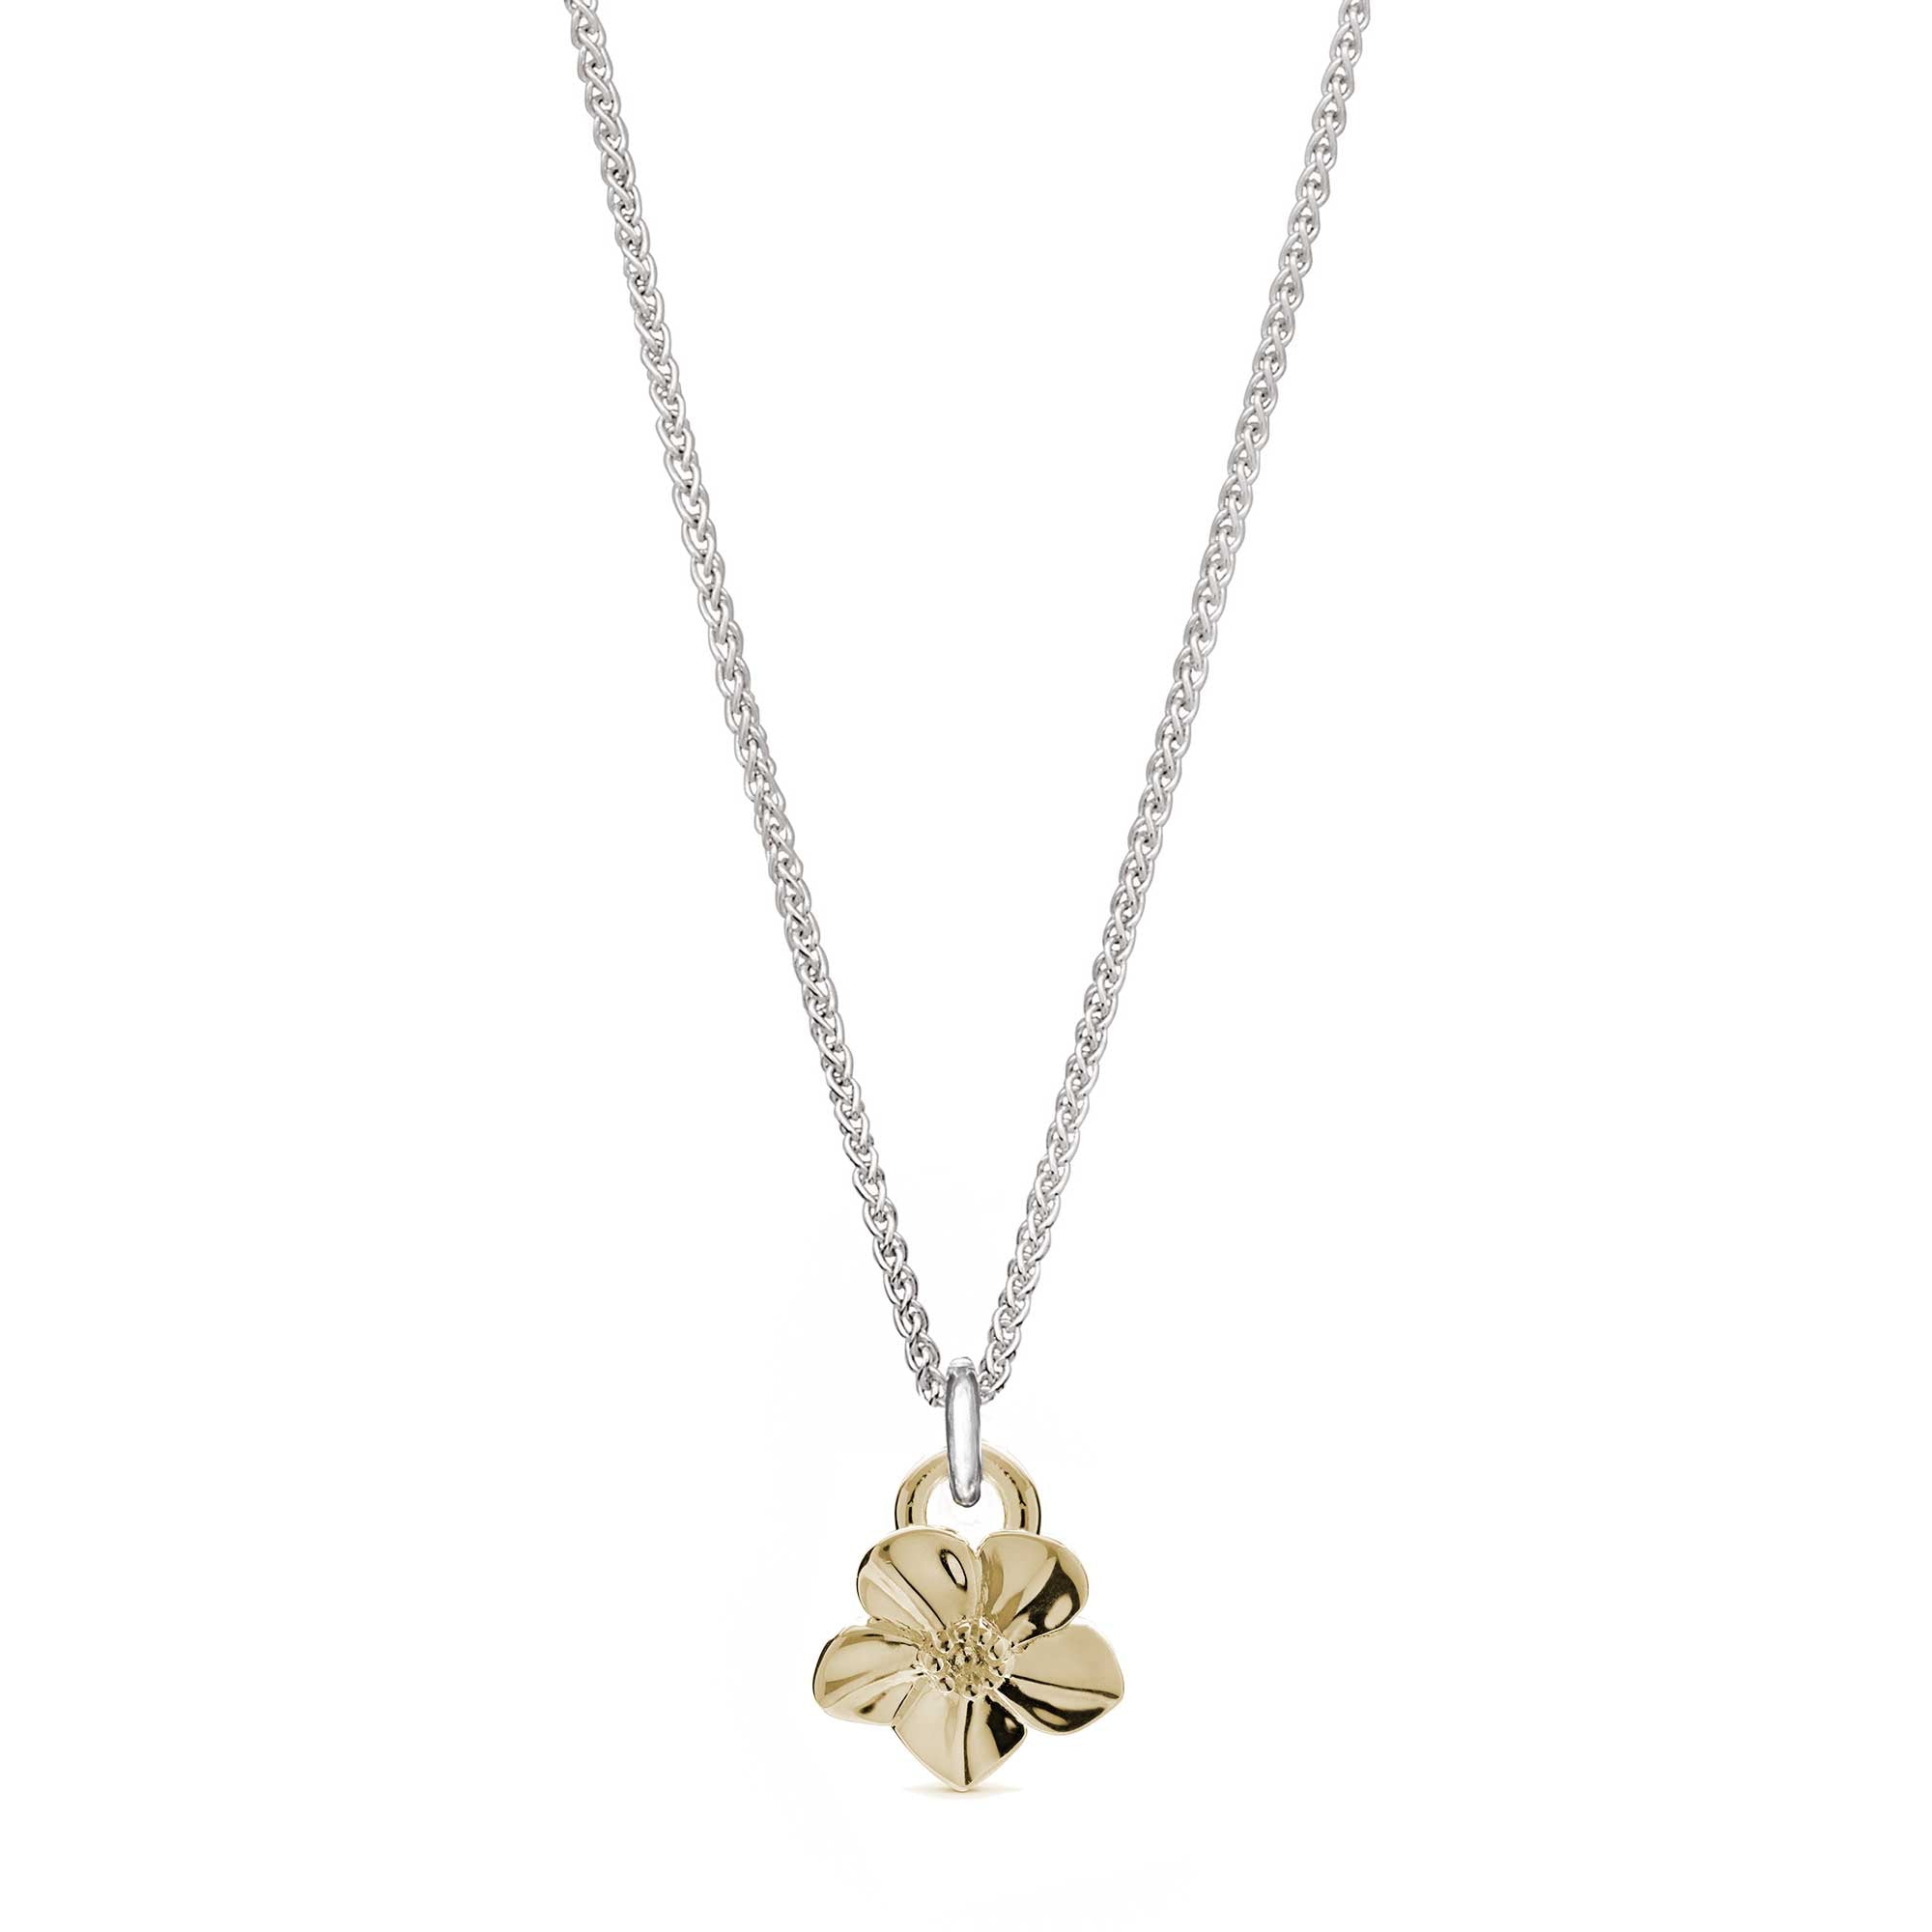 Solid gold forget-me-not flower necklace on silver chain designer Scarlett Jewellery Chelsea Flower Show